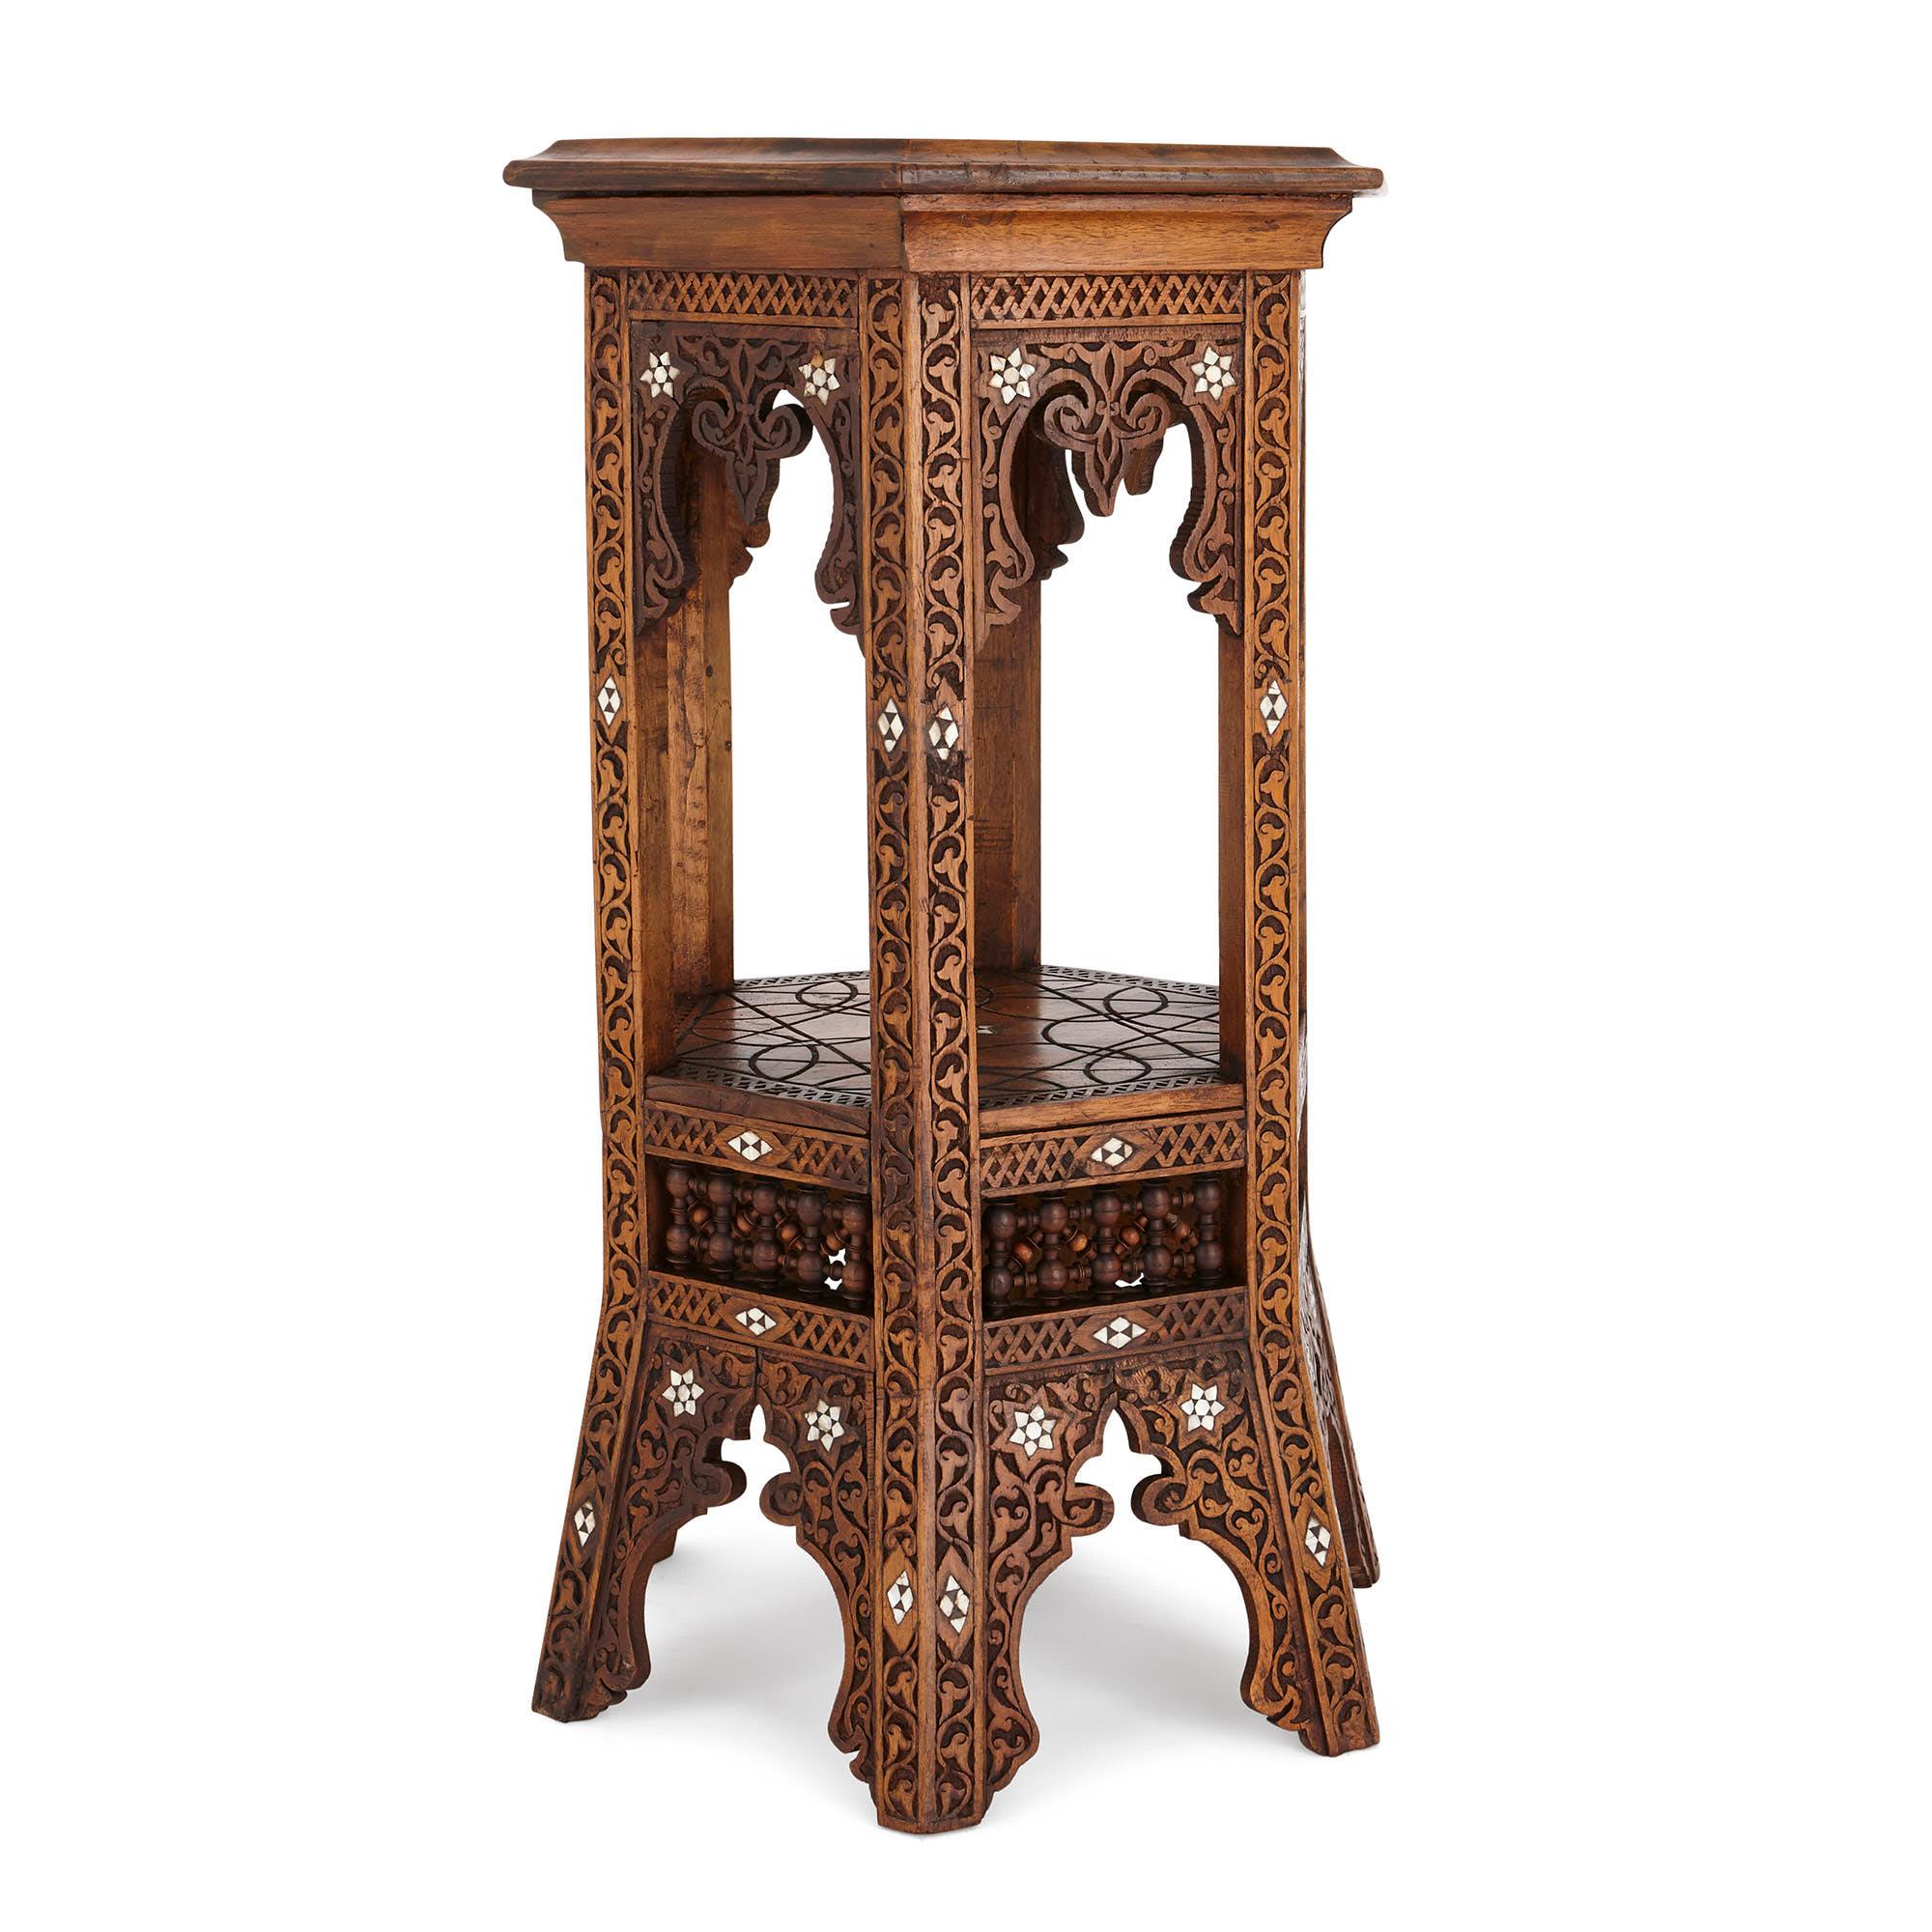 This hardwood side table is a wonderful piece of Indo-Portuguese furniture. The table is designed in a Moorish style, which was a variation of Islamic art. This style flourished in North Africa and parts of Spain and Portugal, which were occupied by